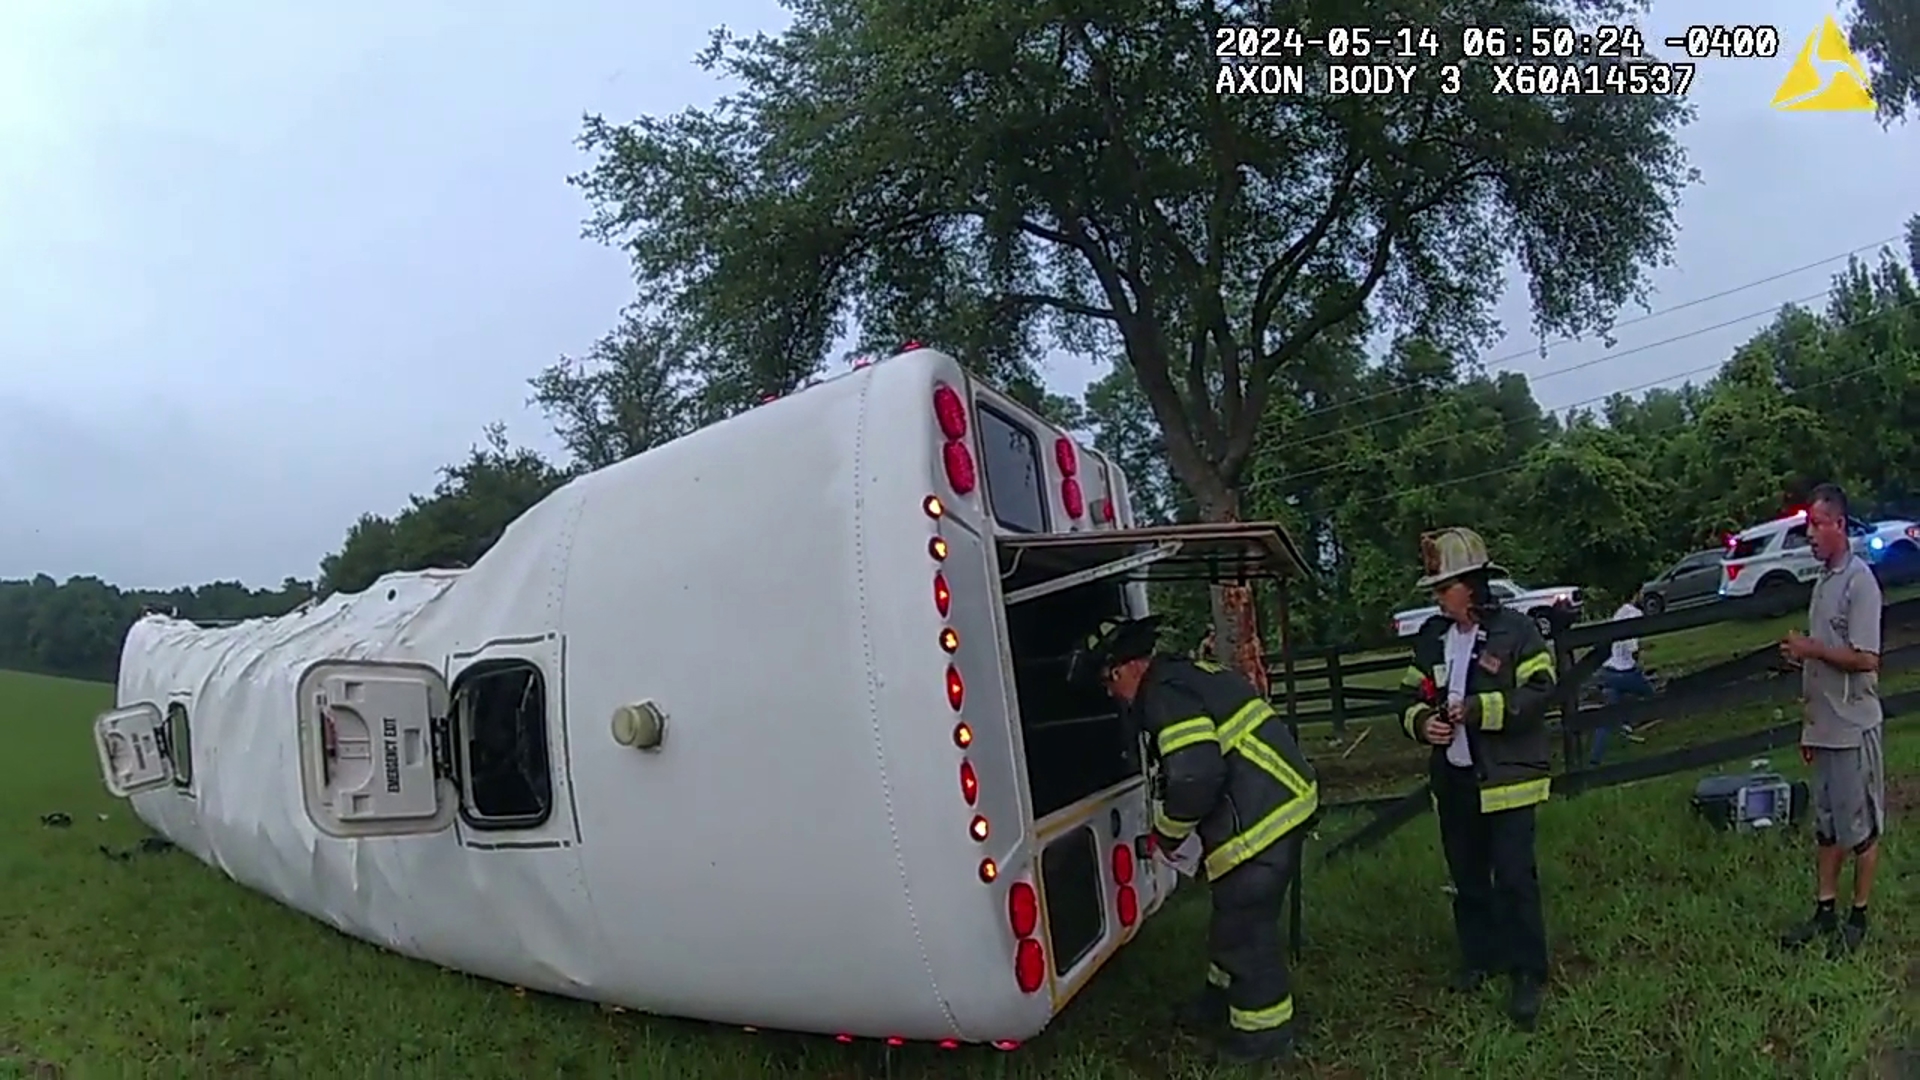 Body camera video from a Marion County deputy shows the aftermath of a bus crash that killed 8 farmworkers and hurt dozens more near Ocala, Florida.